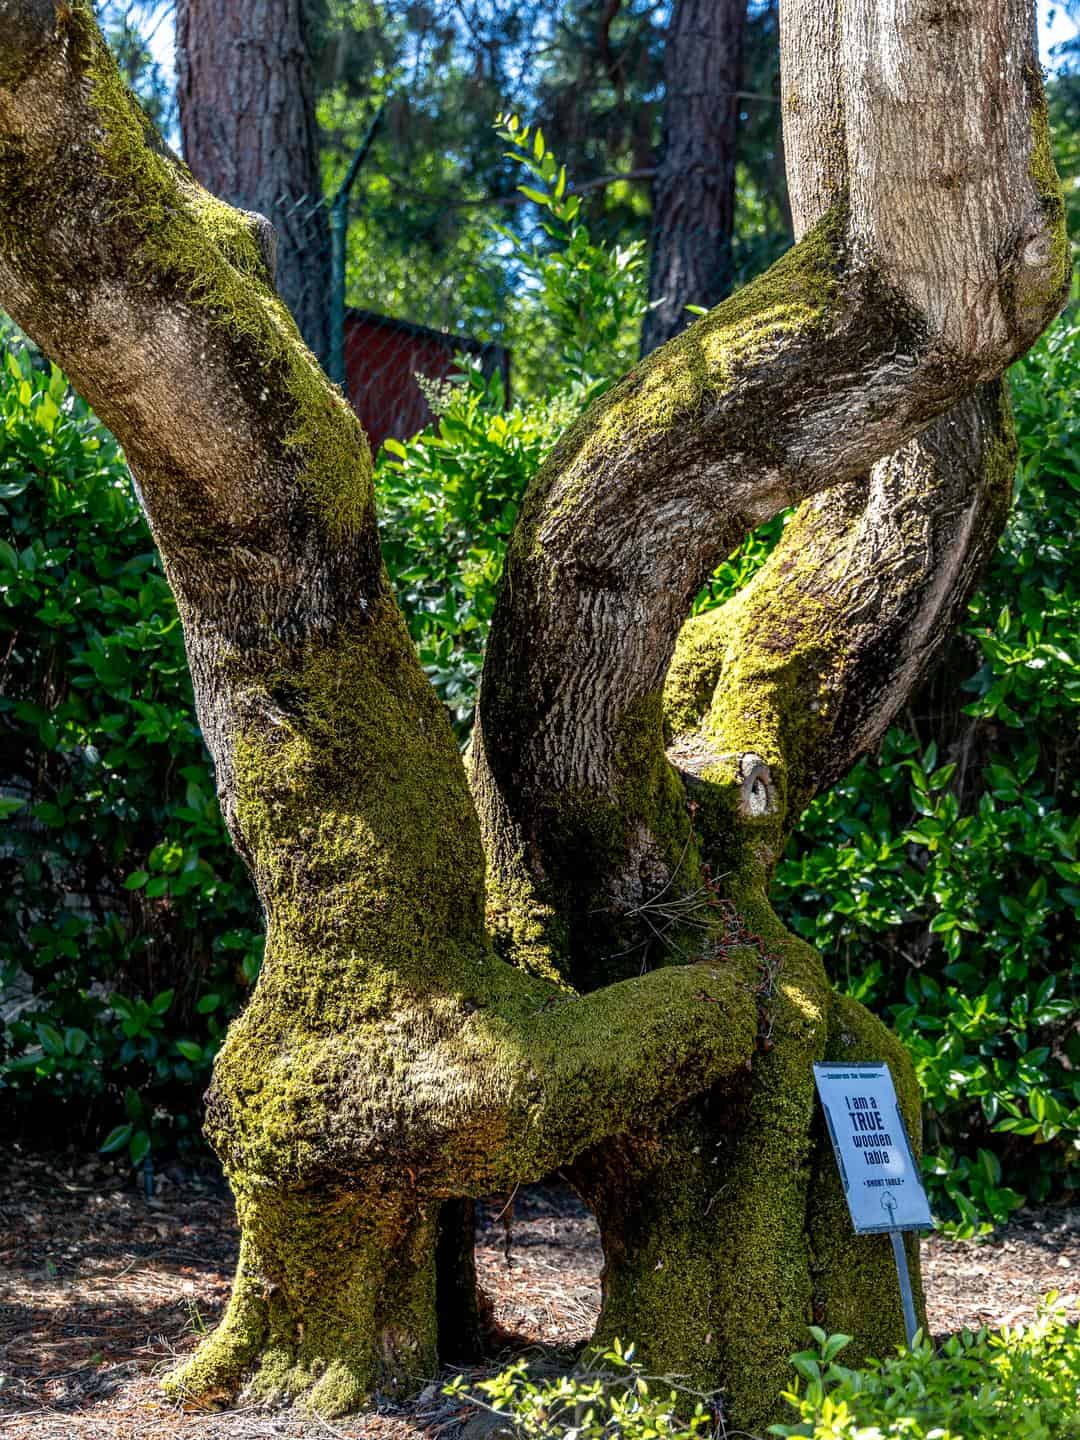 One of the 25 Circus Trees a Gilroy Gardens - an example of ornamental grafting